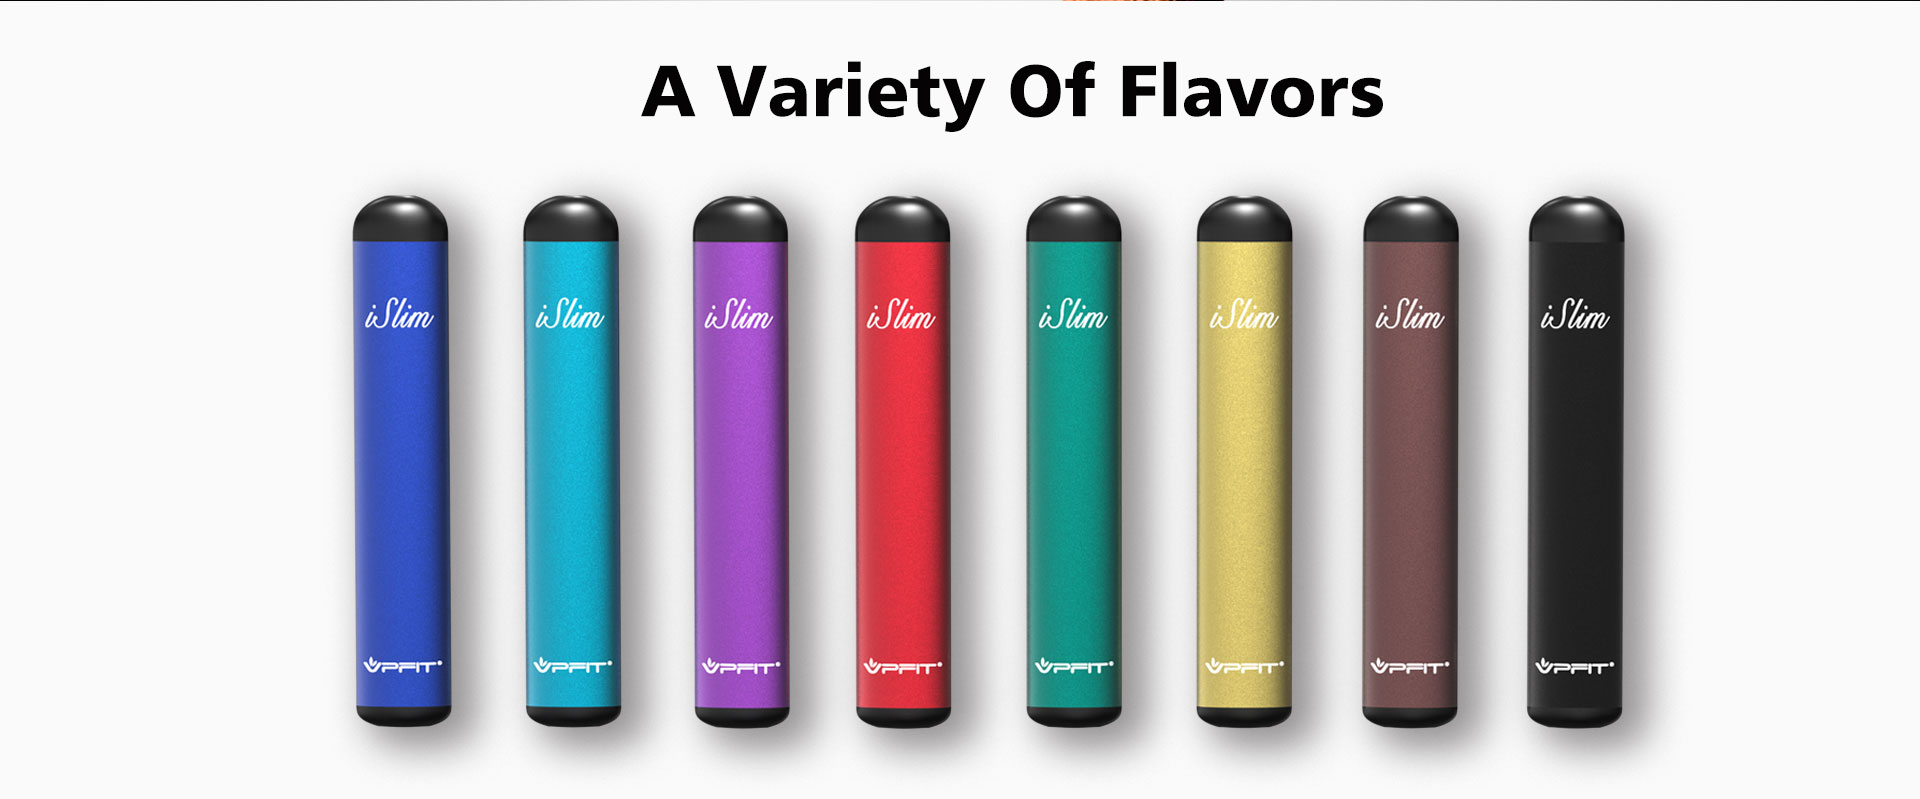 islim of different flavors with different color